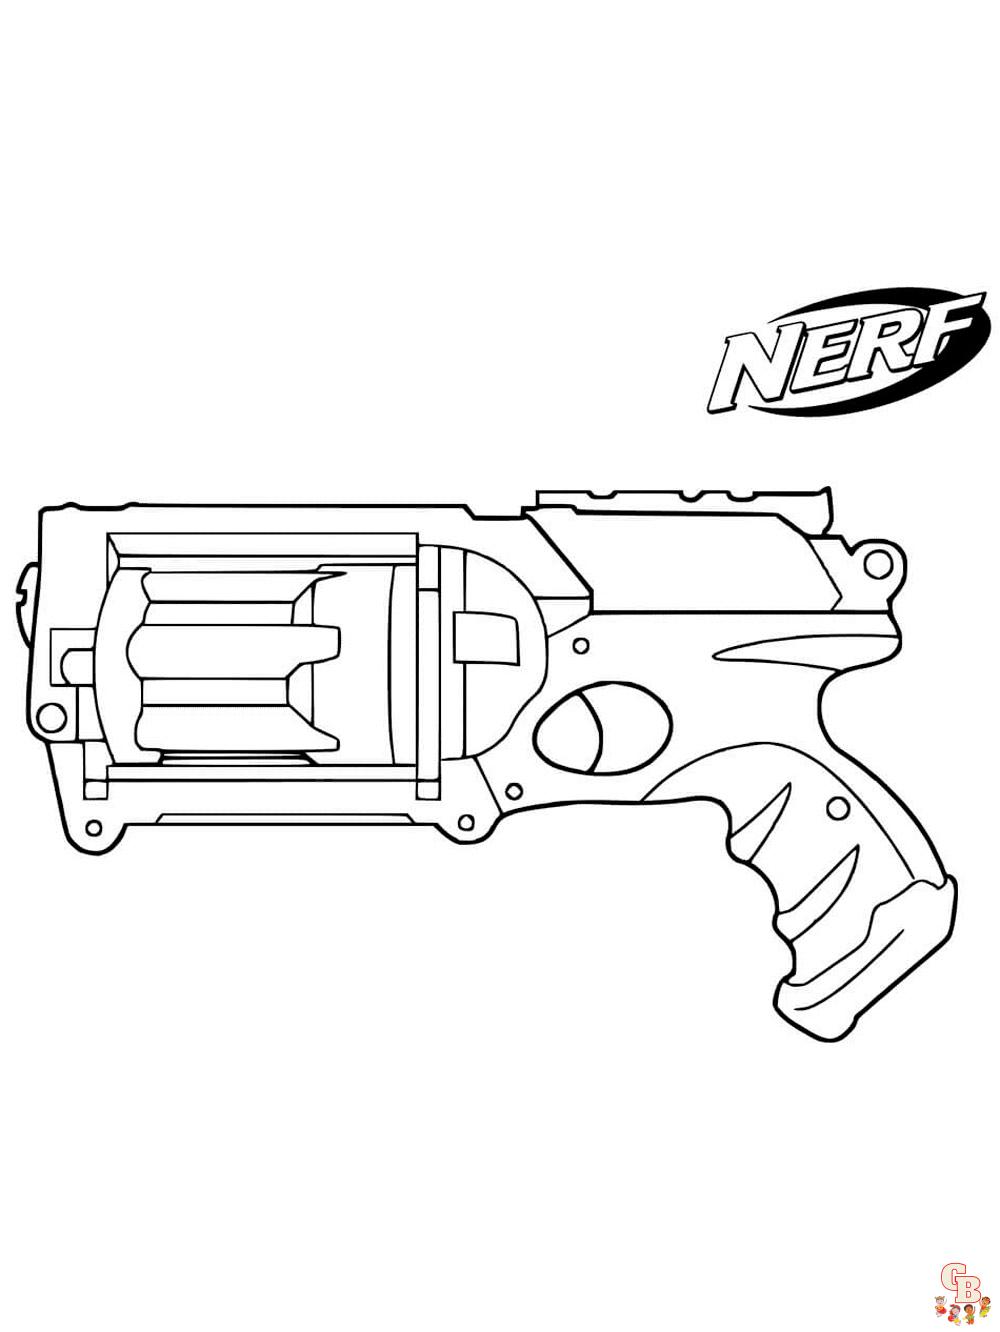 Nerf Gun Coloring Pages 4